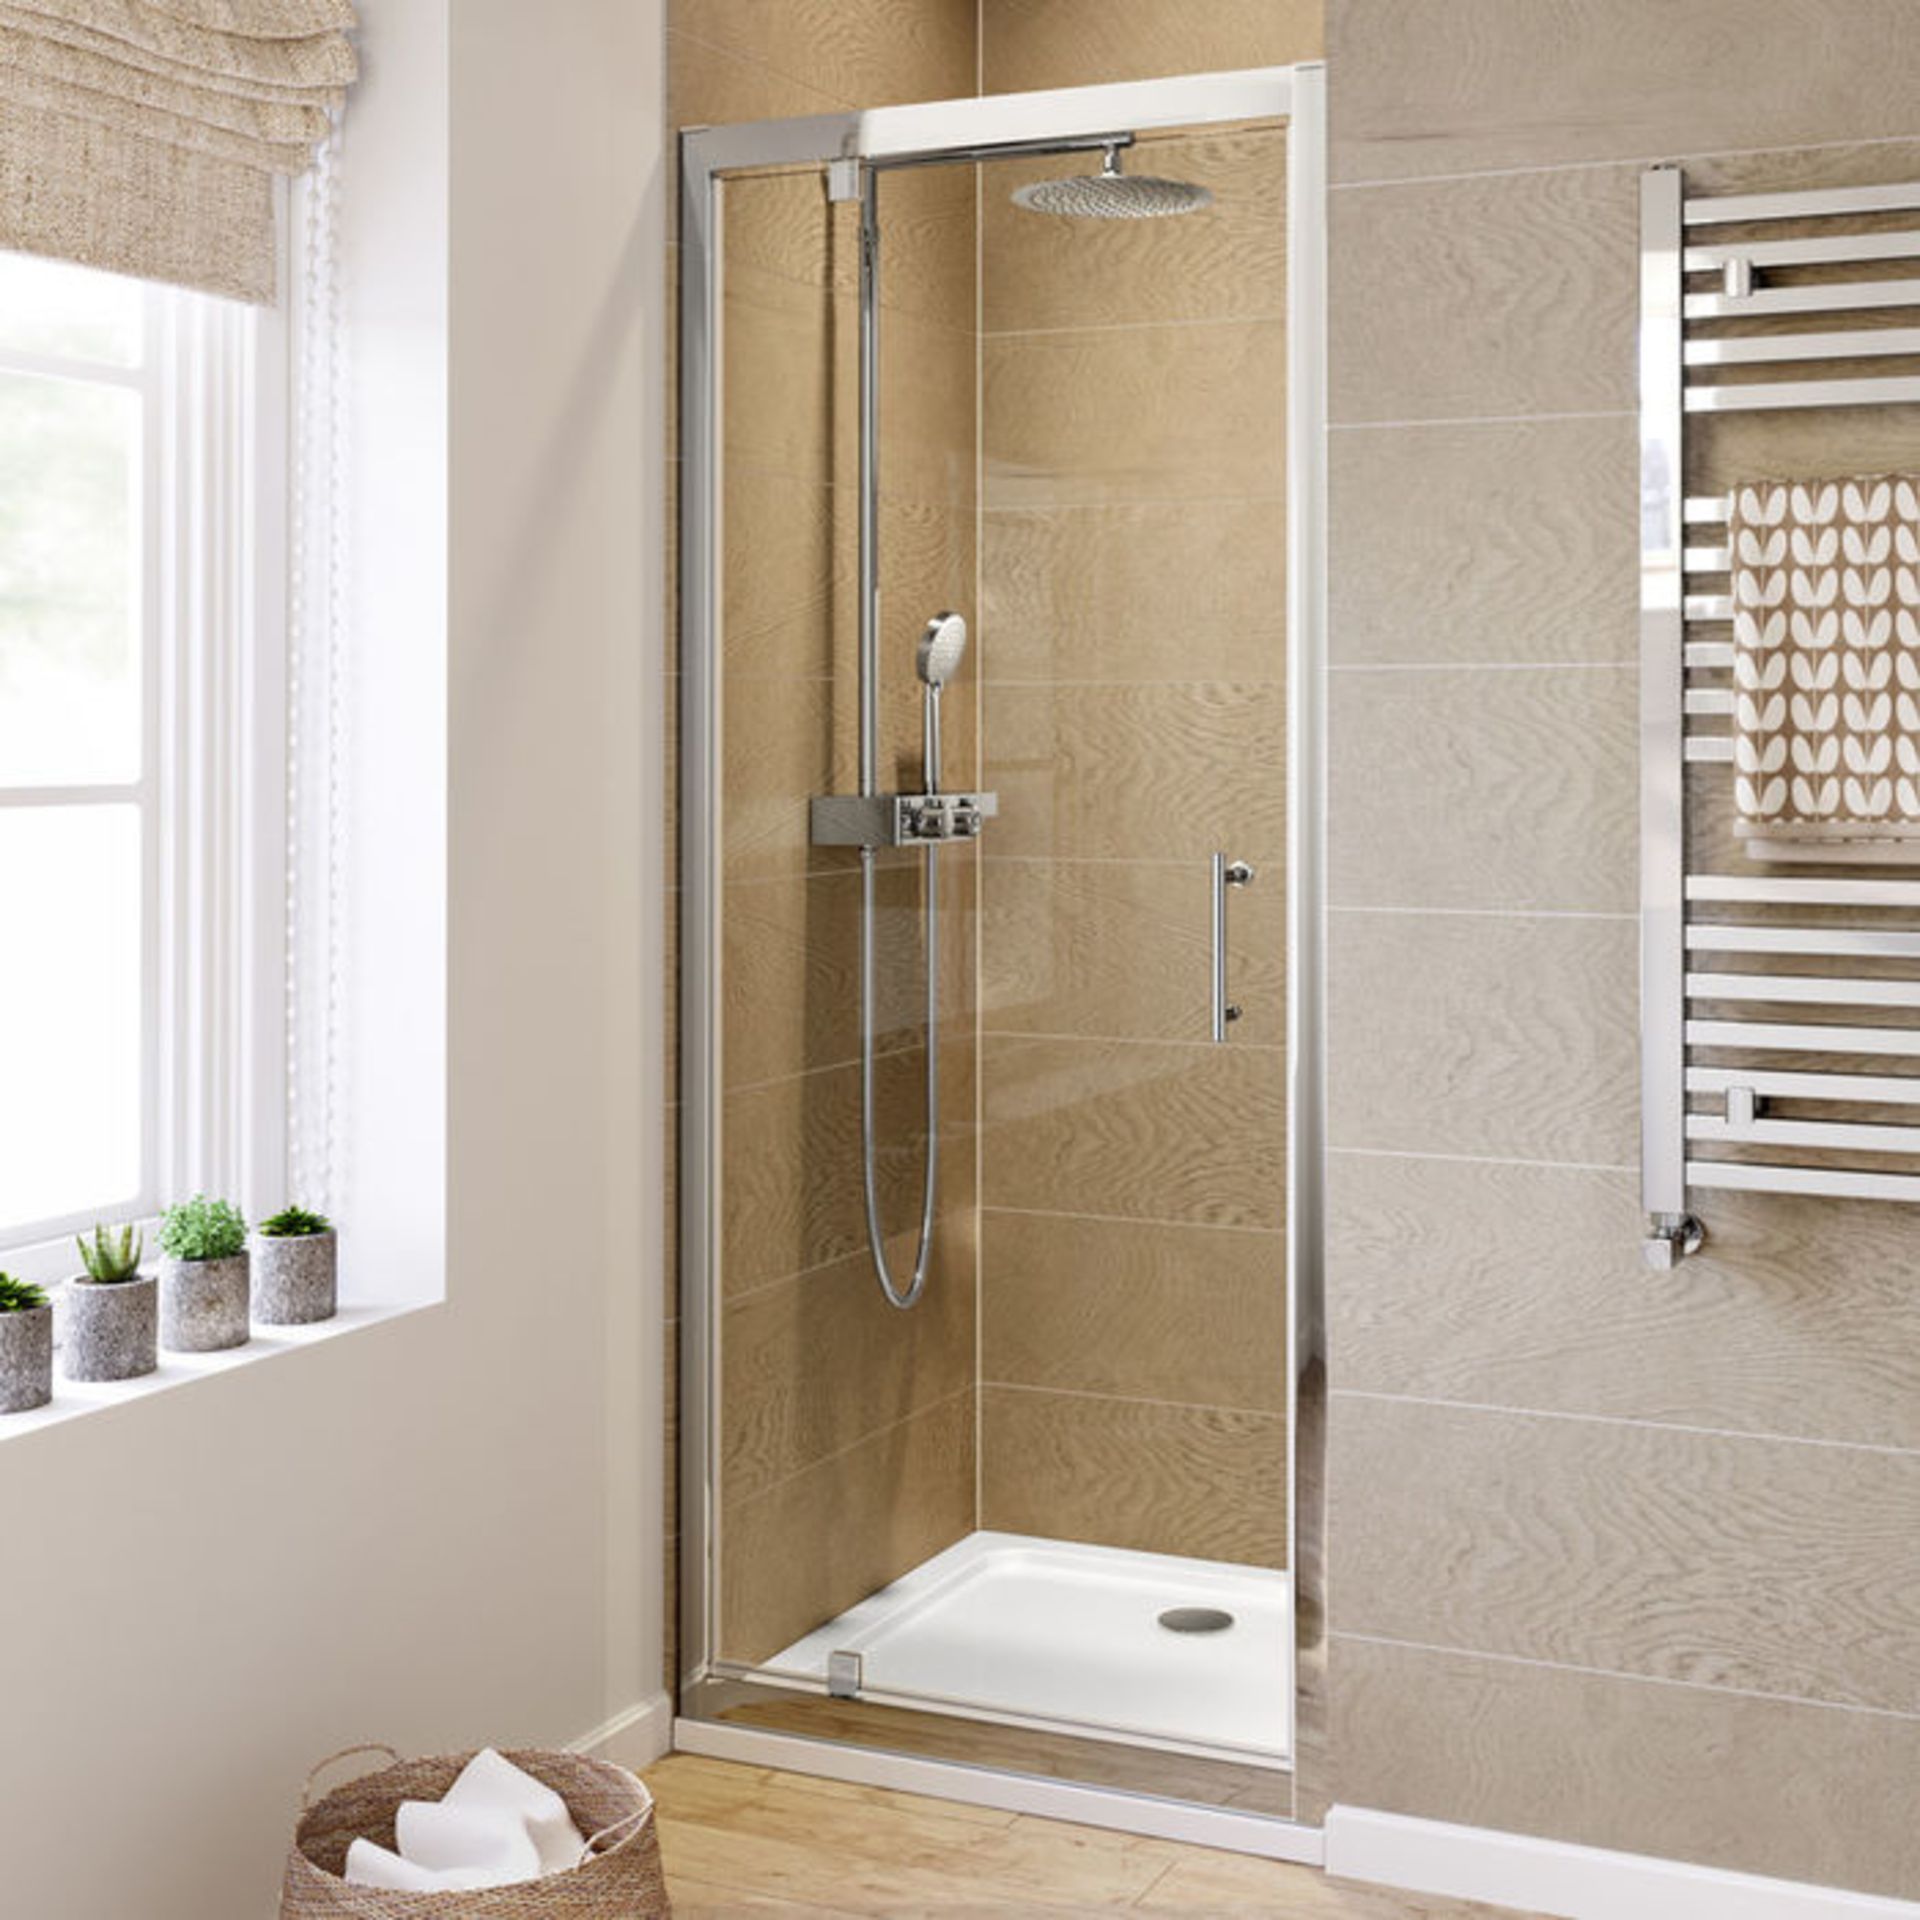 New (W50) 6mm - Elements Pivot 760mm Shower Door. 6mm Safety Glass Fully Waterproof Tested. ... - Image 2 of 3